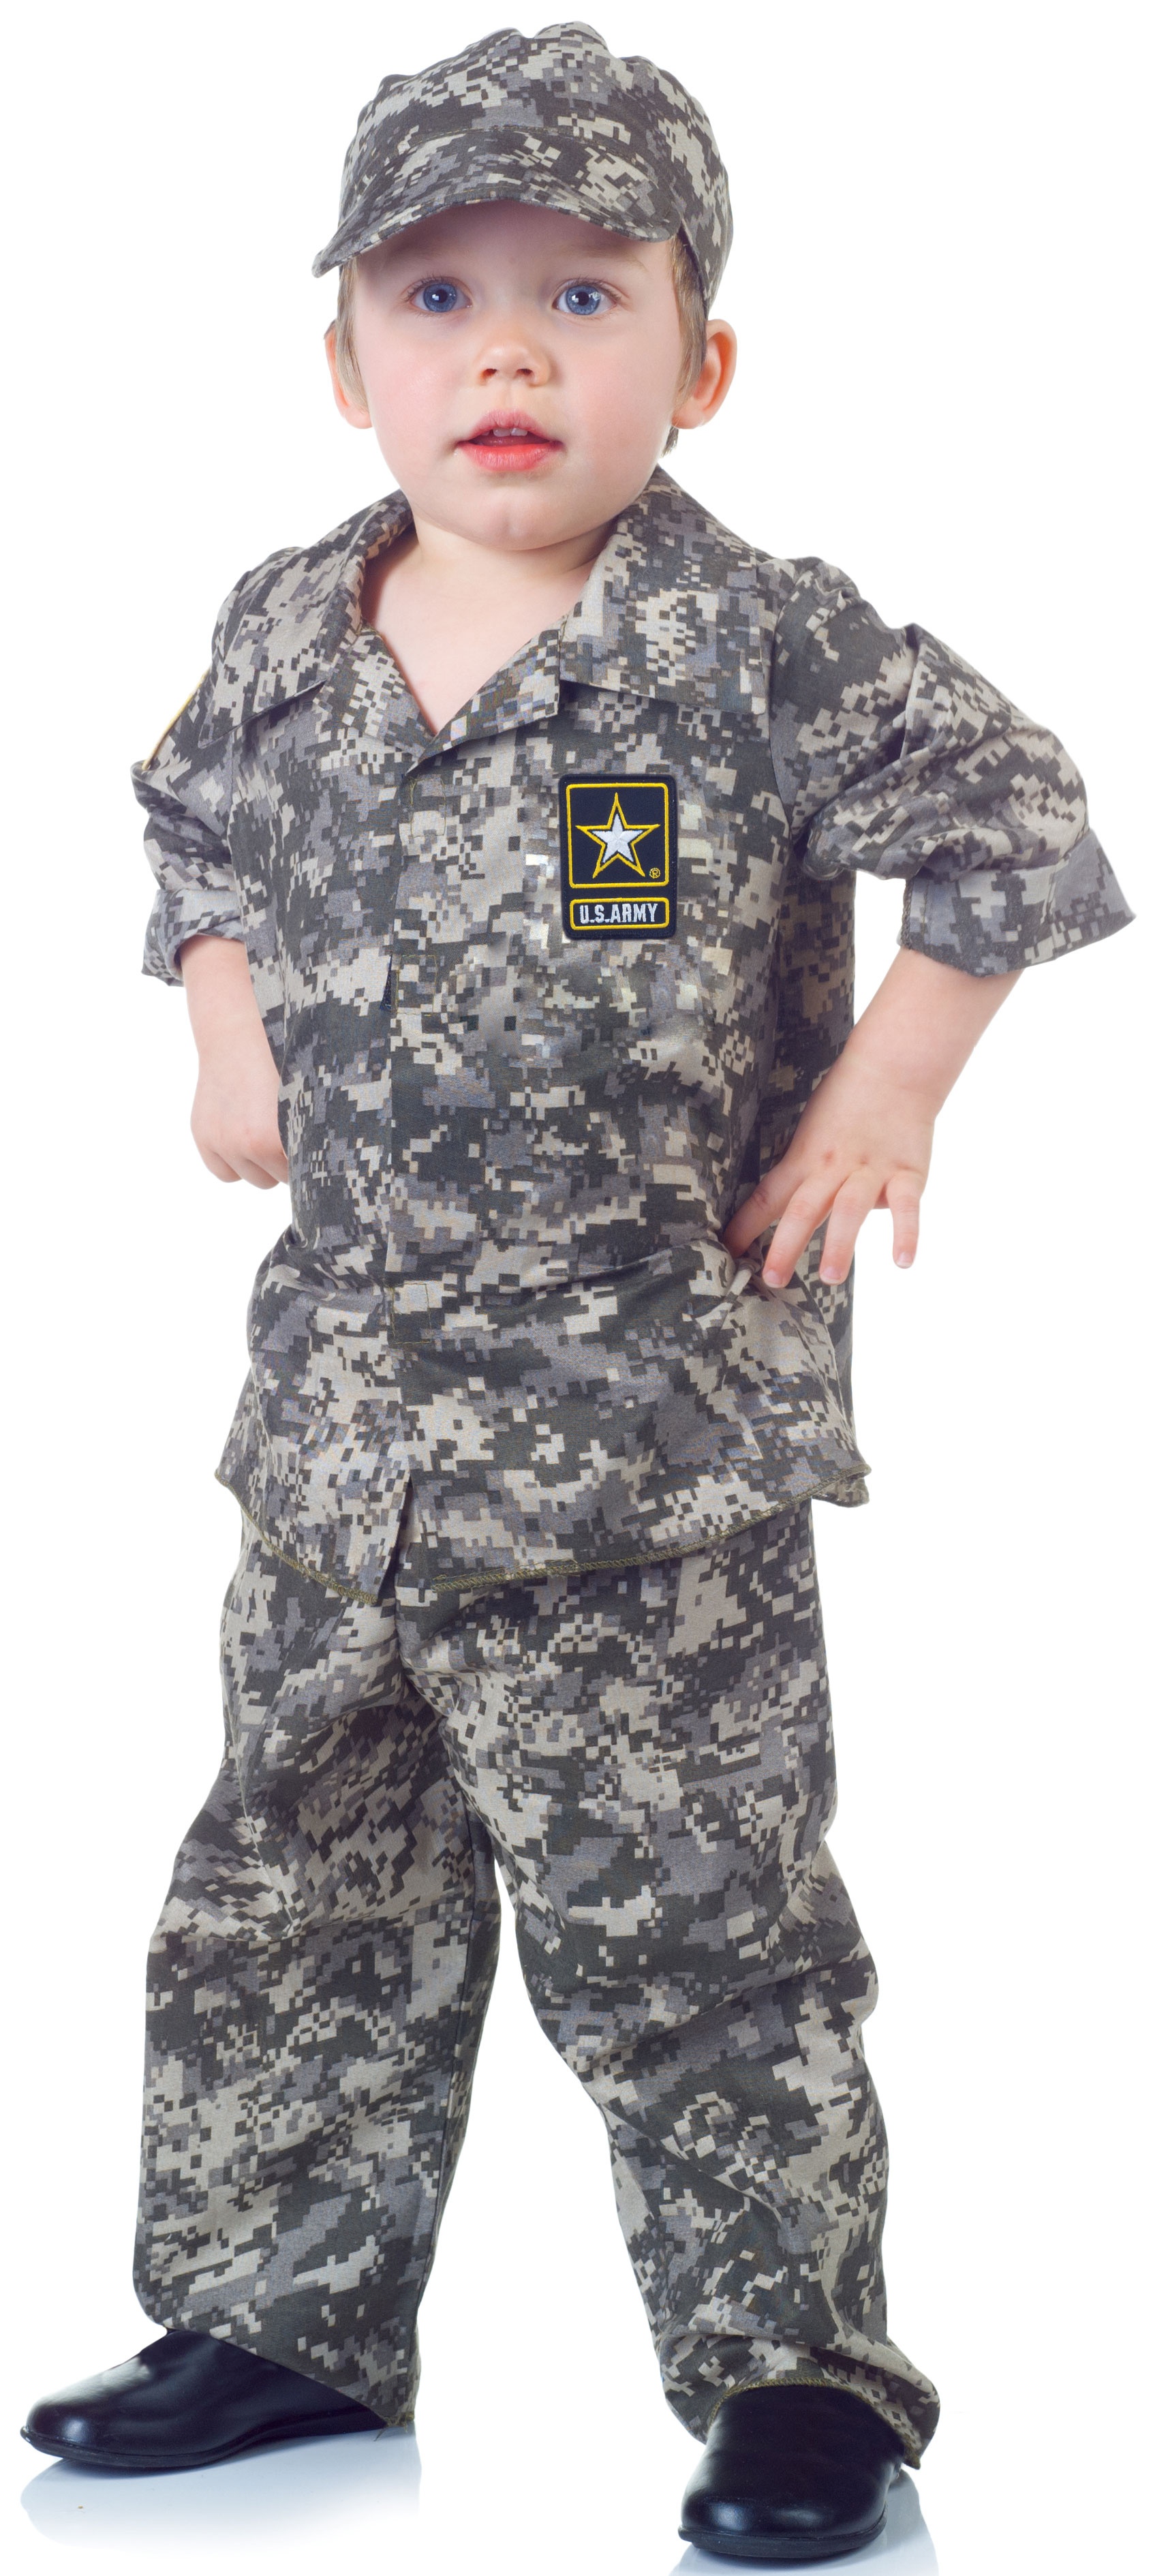 http://www.mrcostumes.com/images/pz/20129/26052_US_Army_Camo_Set_Toddler.jpg